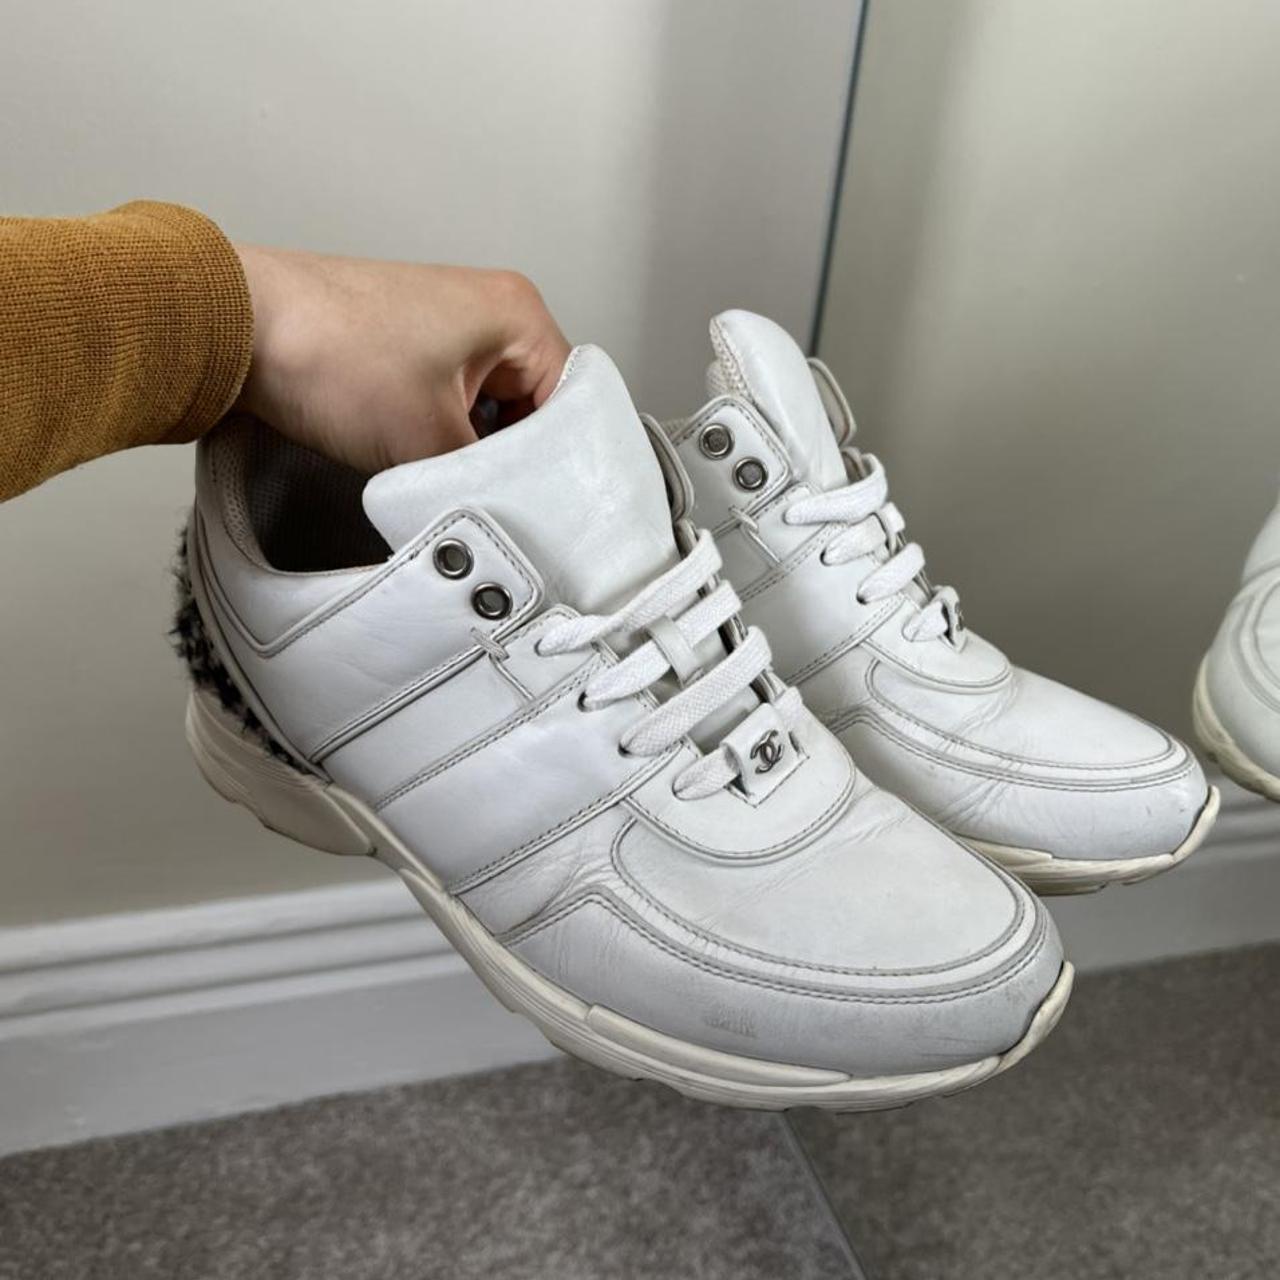 CHANEL authentic trainers made of white leather & - Depop